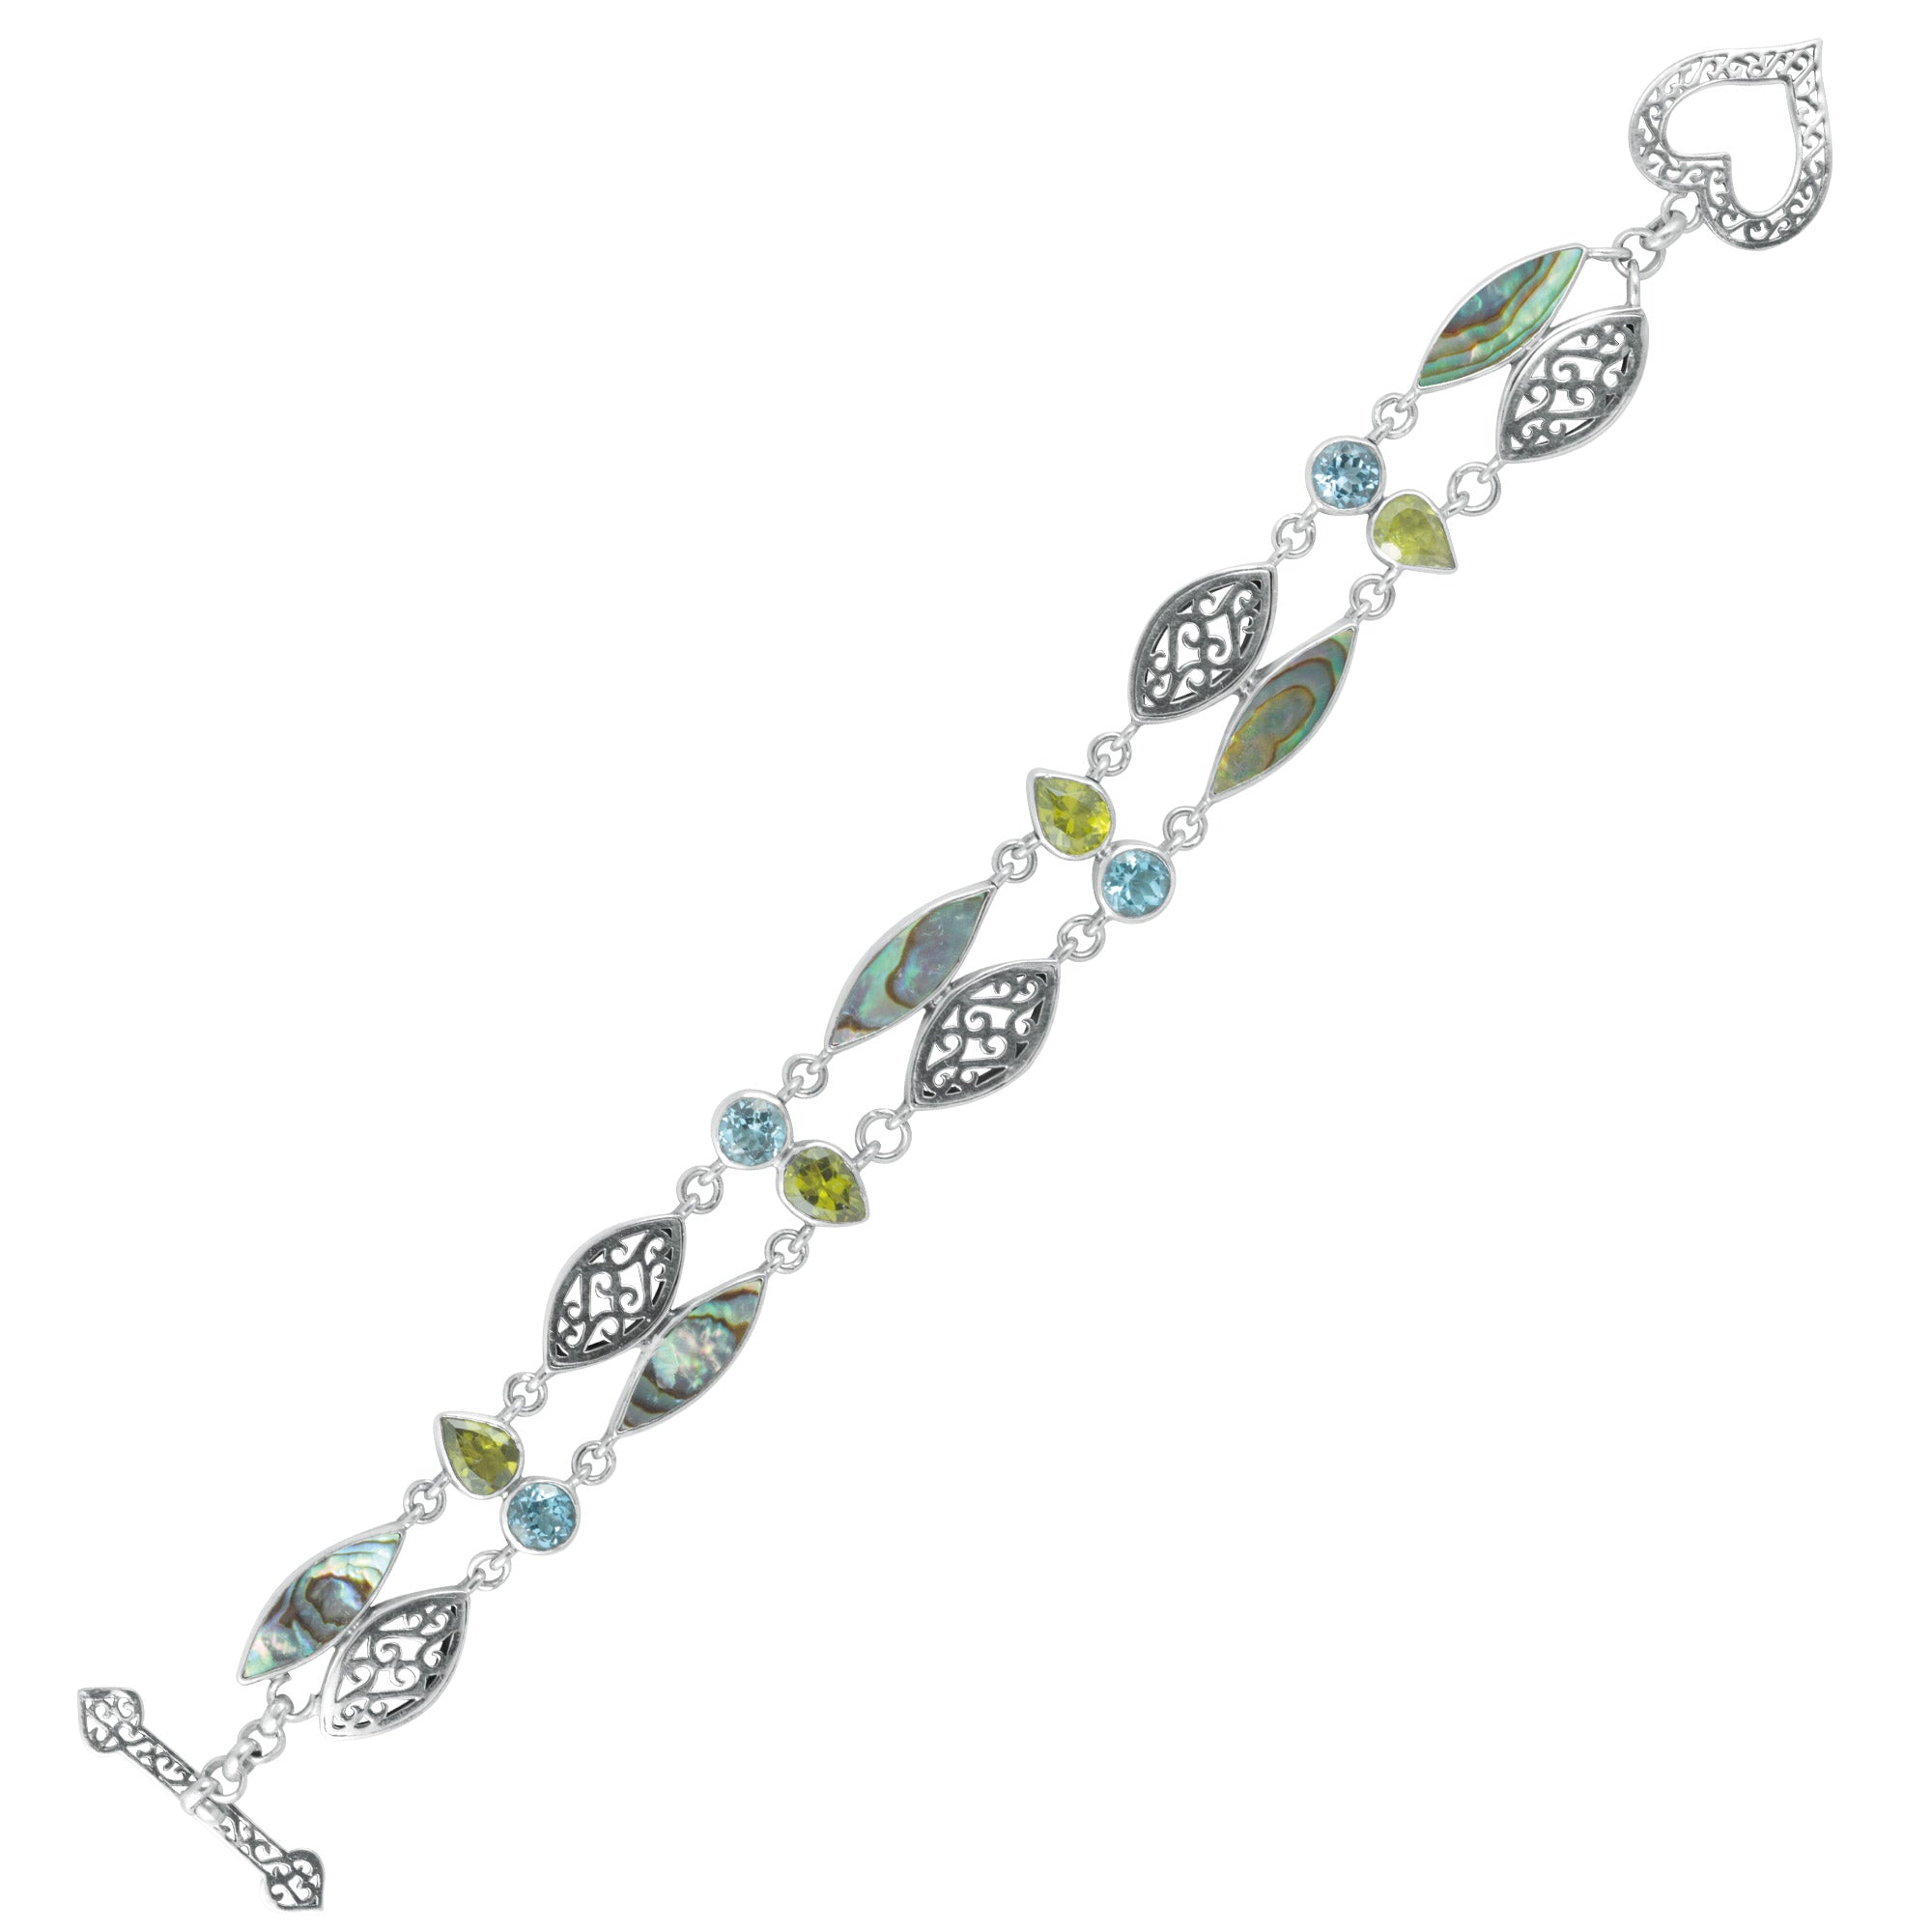 Sterling Silver Bracelet With Paua, Peridot, Blue Topaz & Lace Component